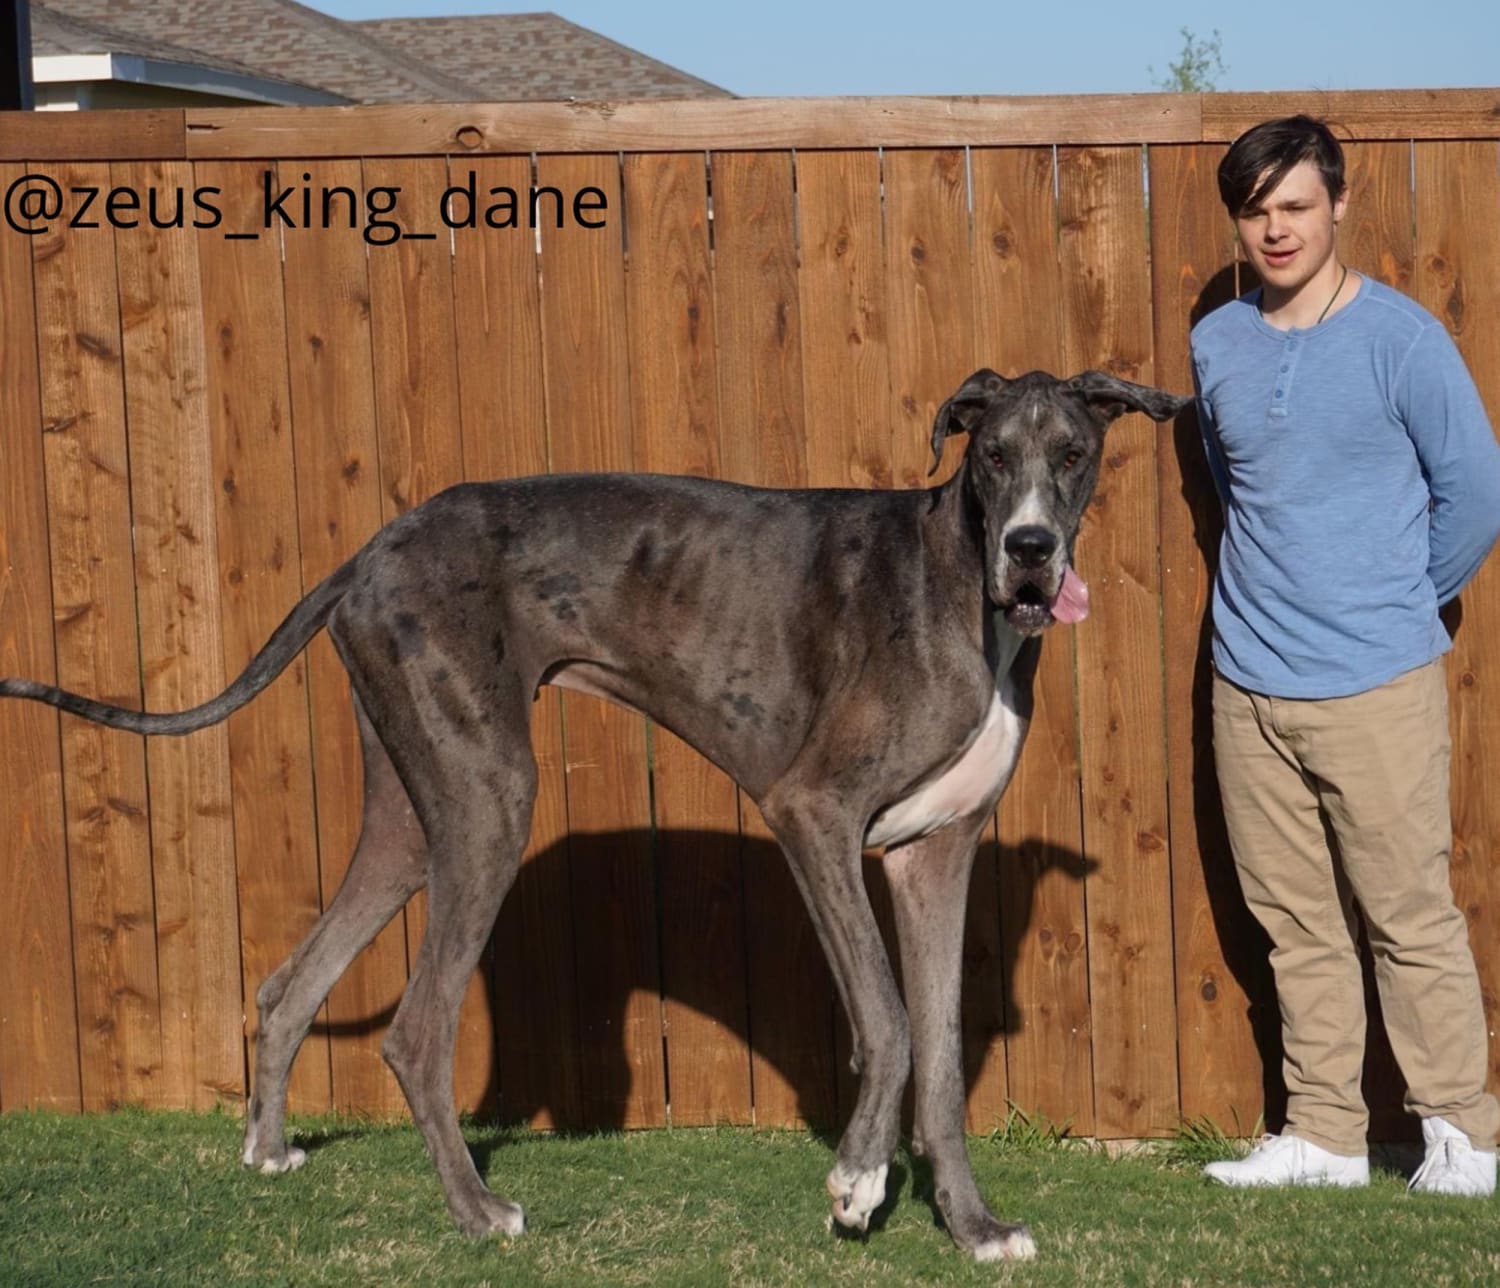 World's tallest living dog is Zeus, a Great Dane, according to Guinness  World Records